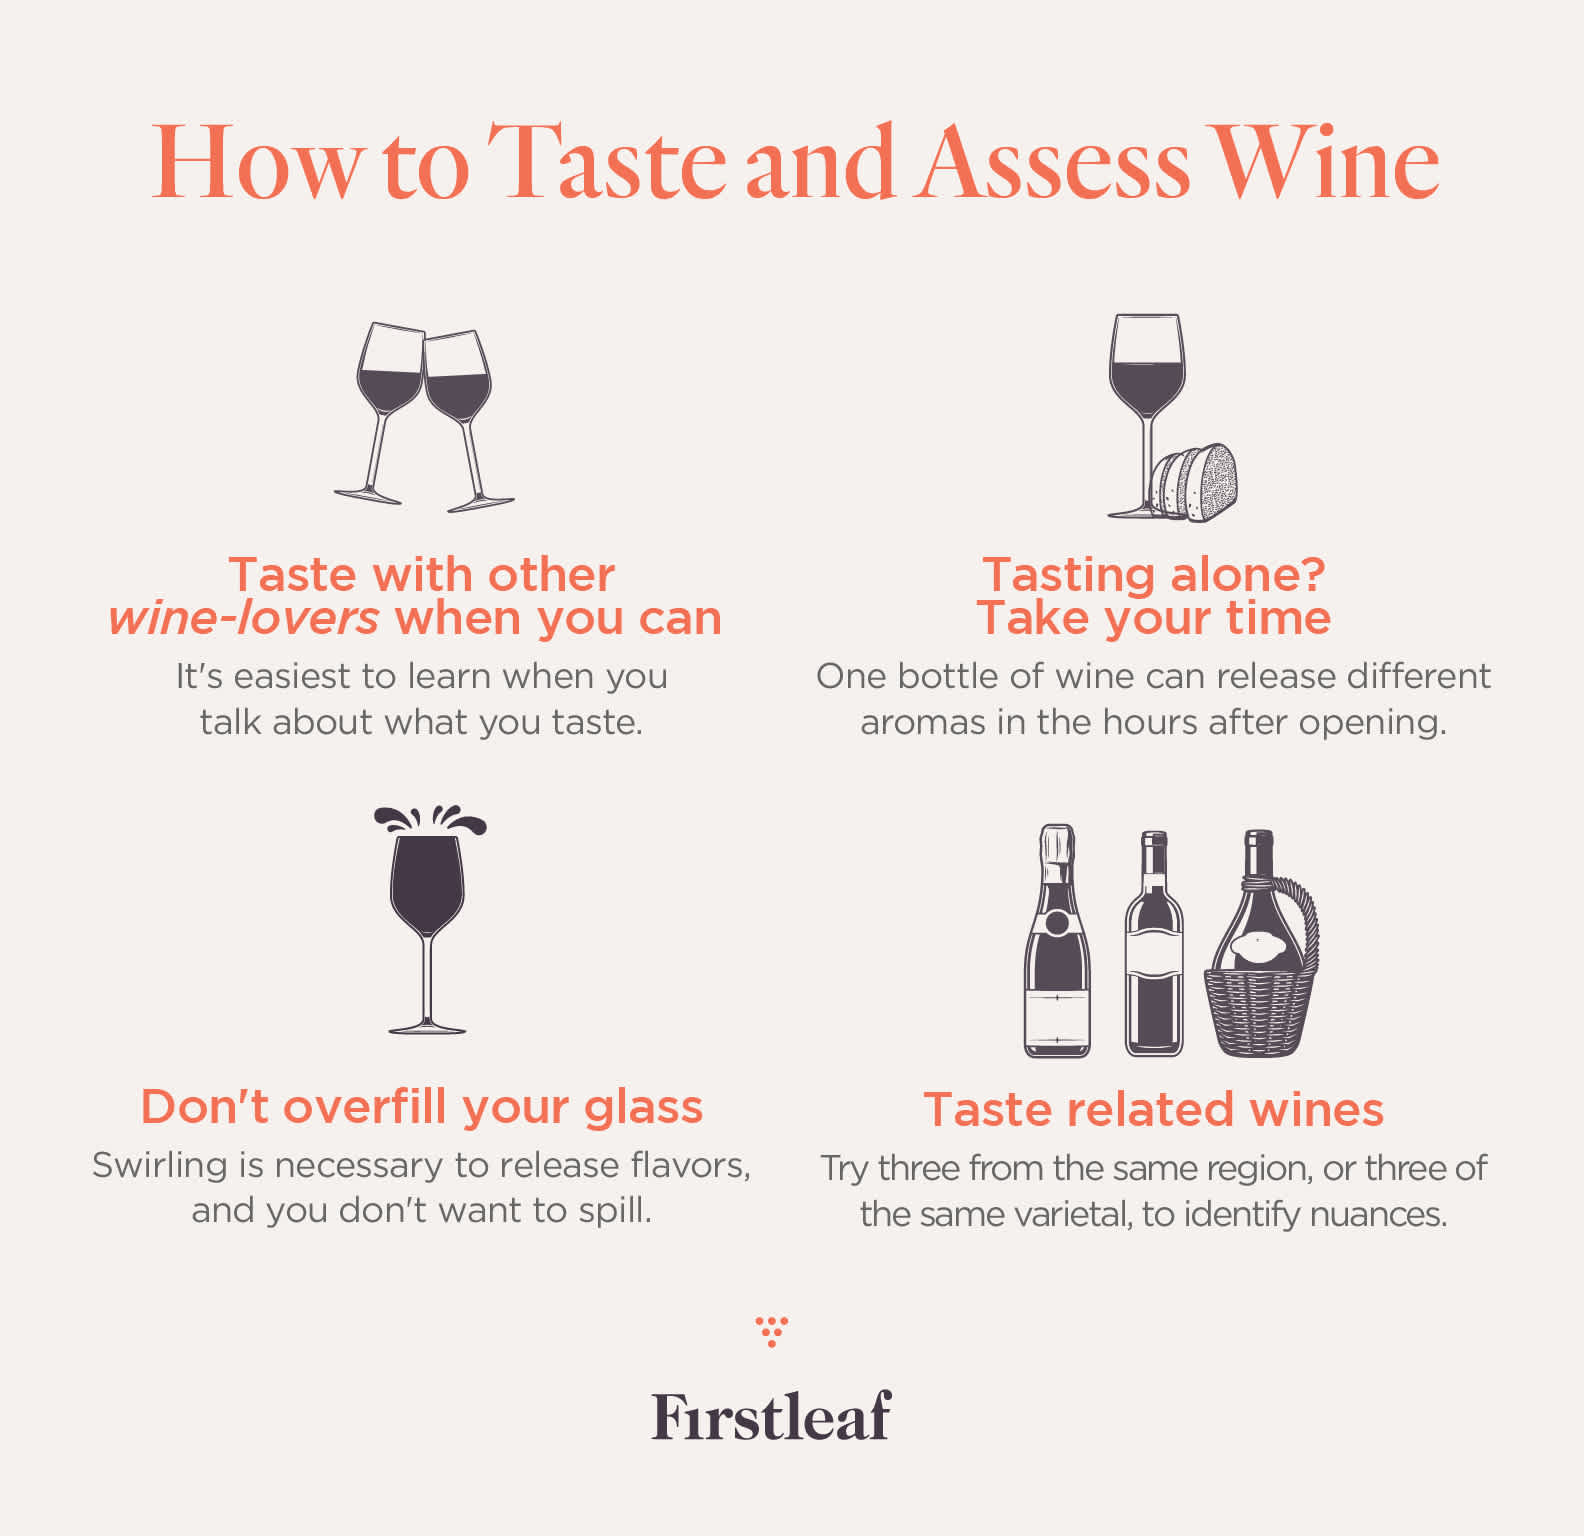 How to Taste and Assess Wine